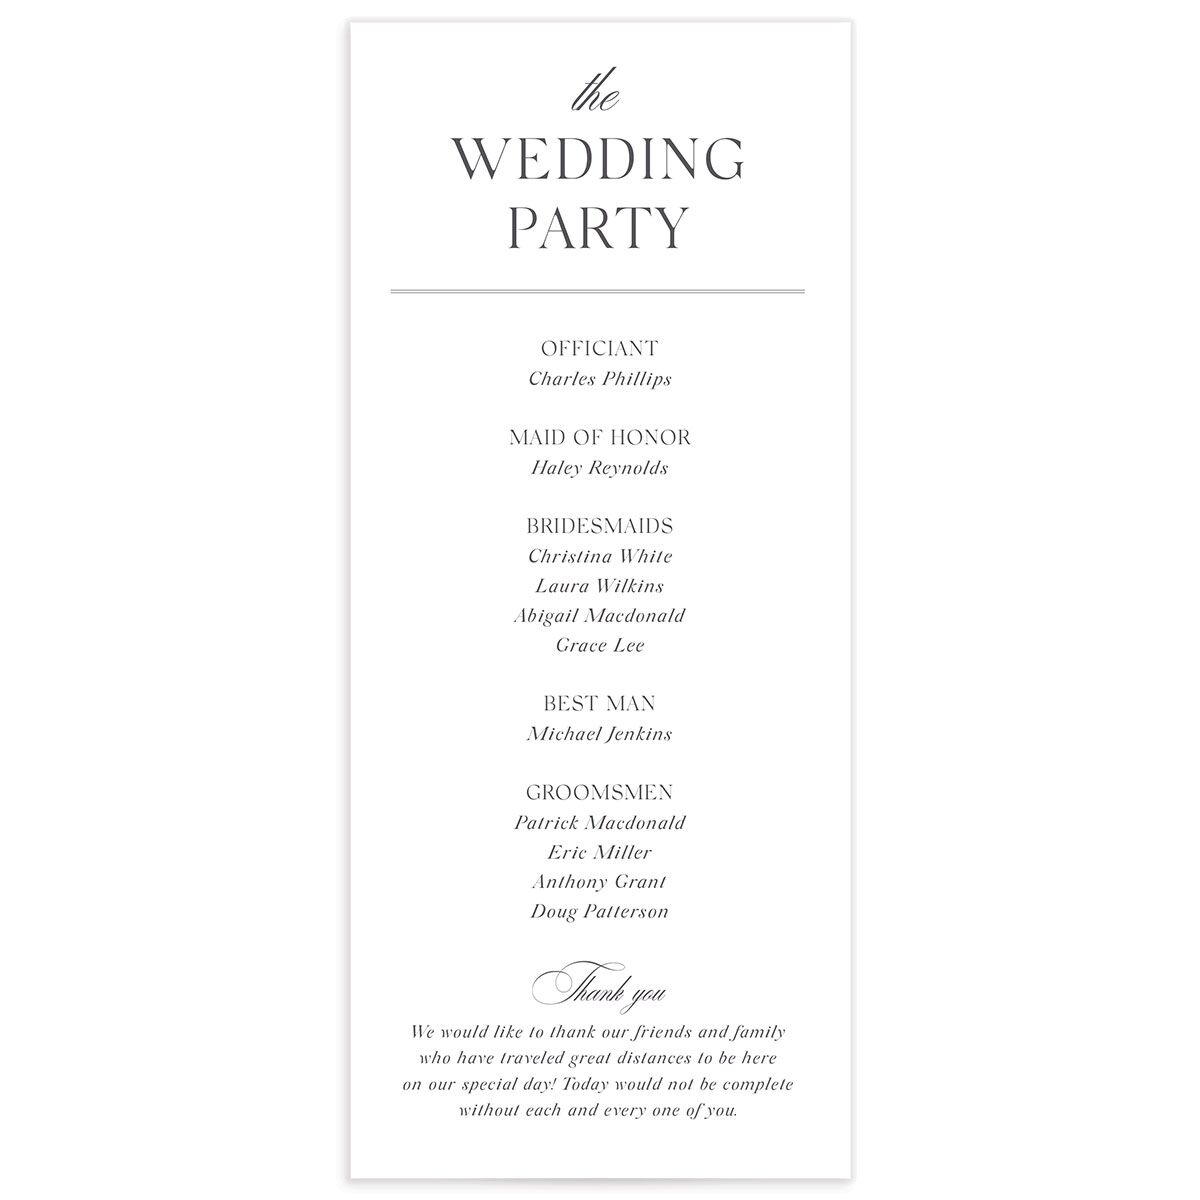 Classic Blooms Wedding Programs back in Pure White